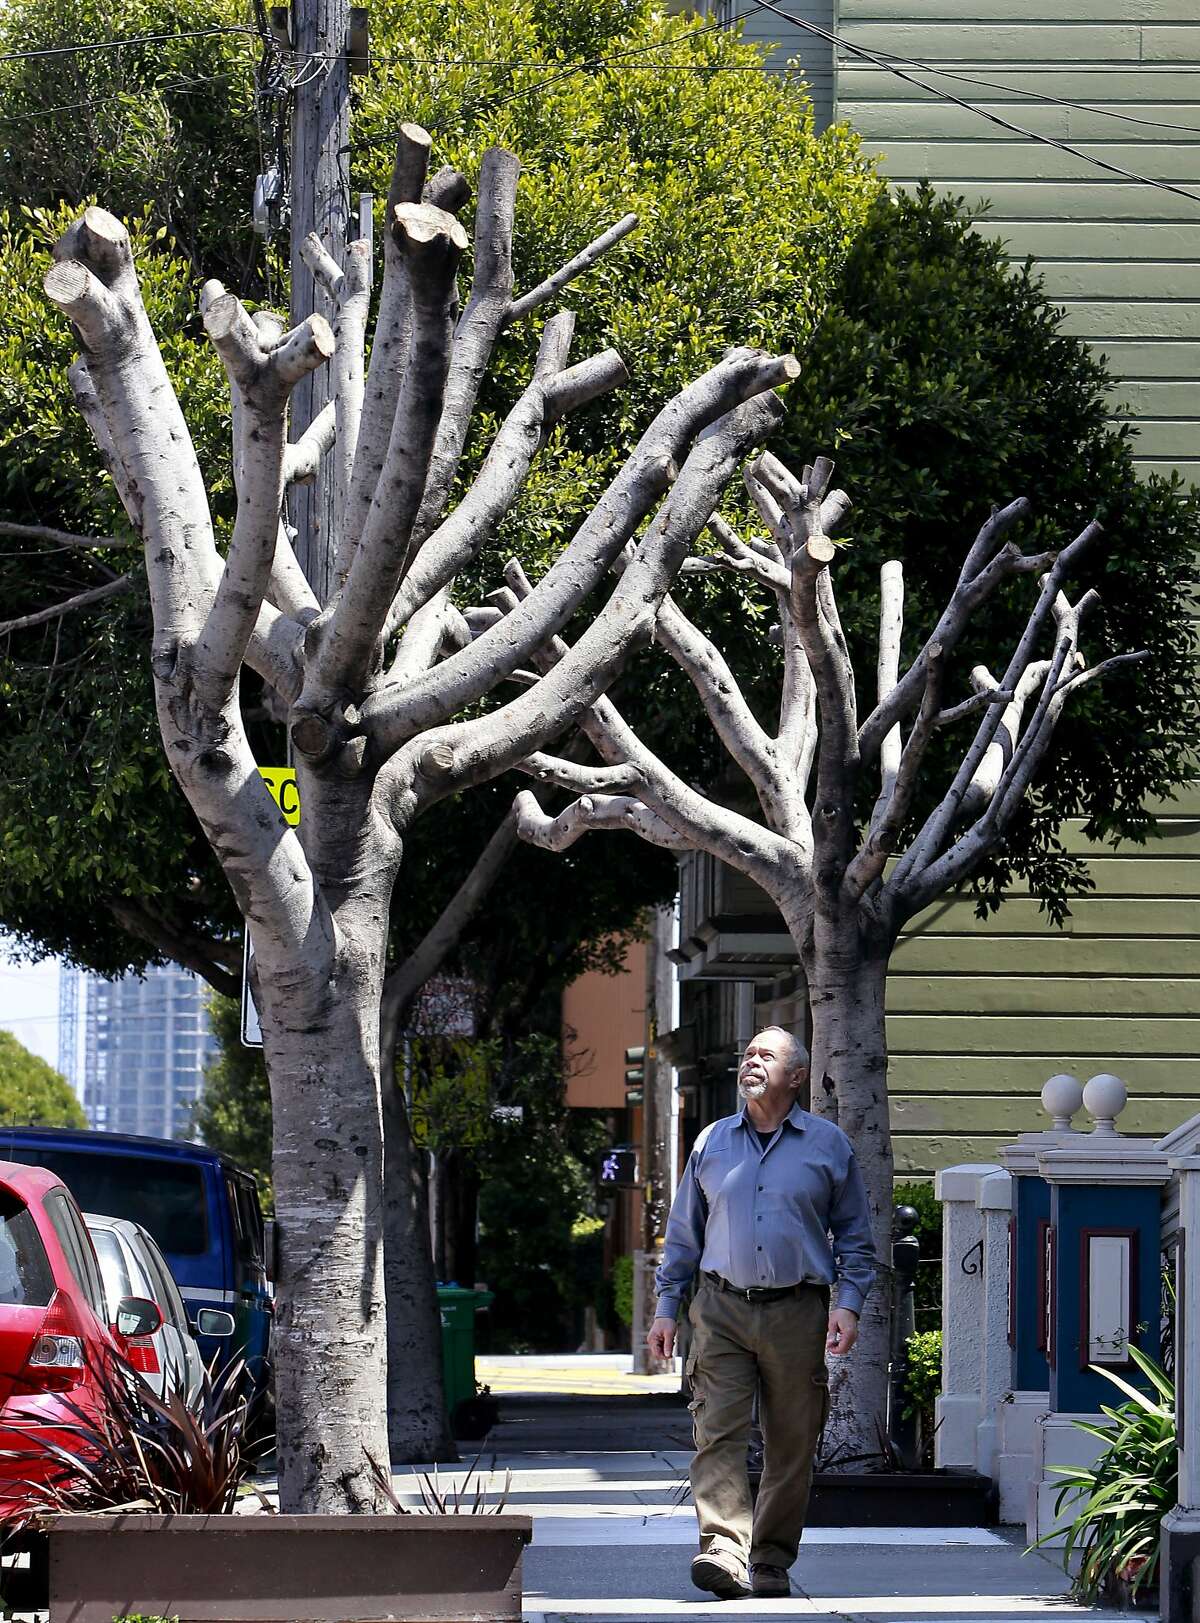 Homeowner Bernard Schweigert, in front of his home along Oak Street with the two Ficus Microcarpa Nitalda trees on his front sidewalk, in San Francisco, Calif., on Friday April 26, 2013. Informed by the City of San Francisco that he is responsible for the maintenance of the trees in front of his home, Schweigert had the trees "pollarded" which is supposed to slow the growth. The city informed him that the process was not done properly and then fined him $1,700 per tree.